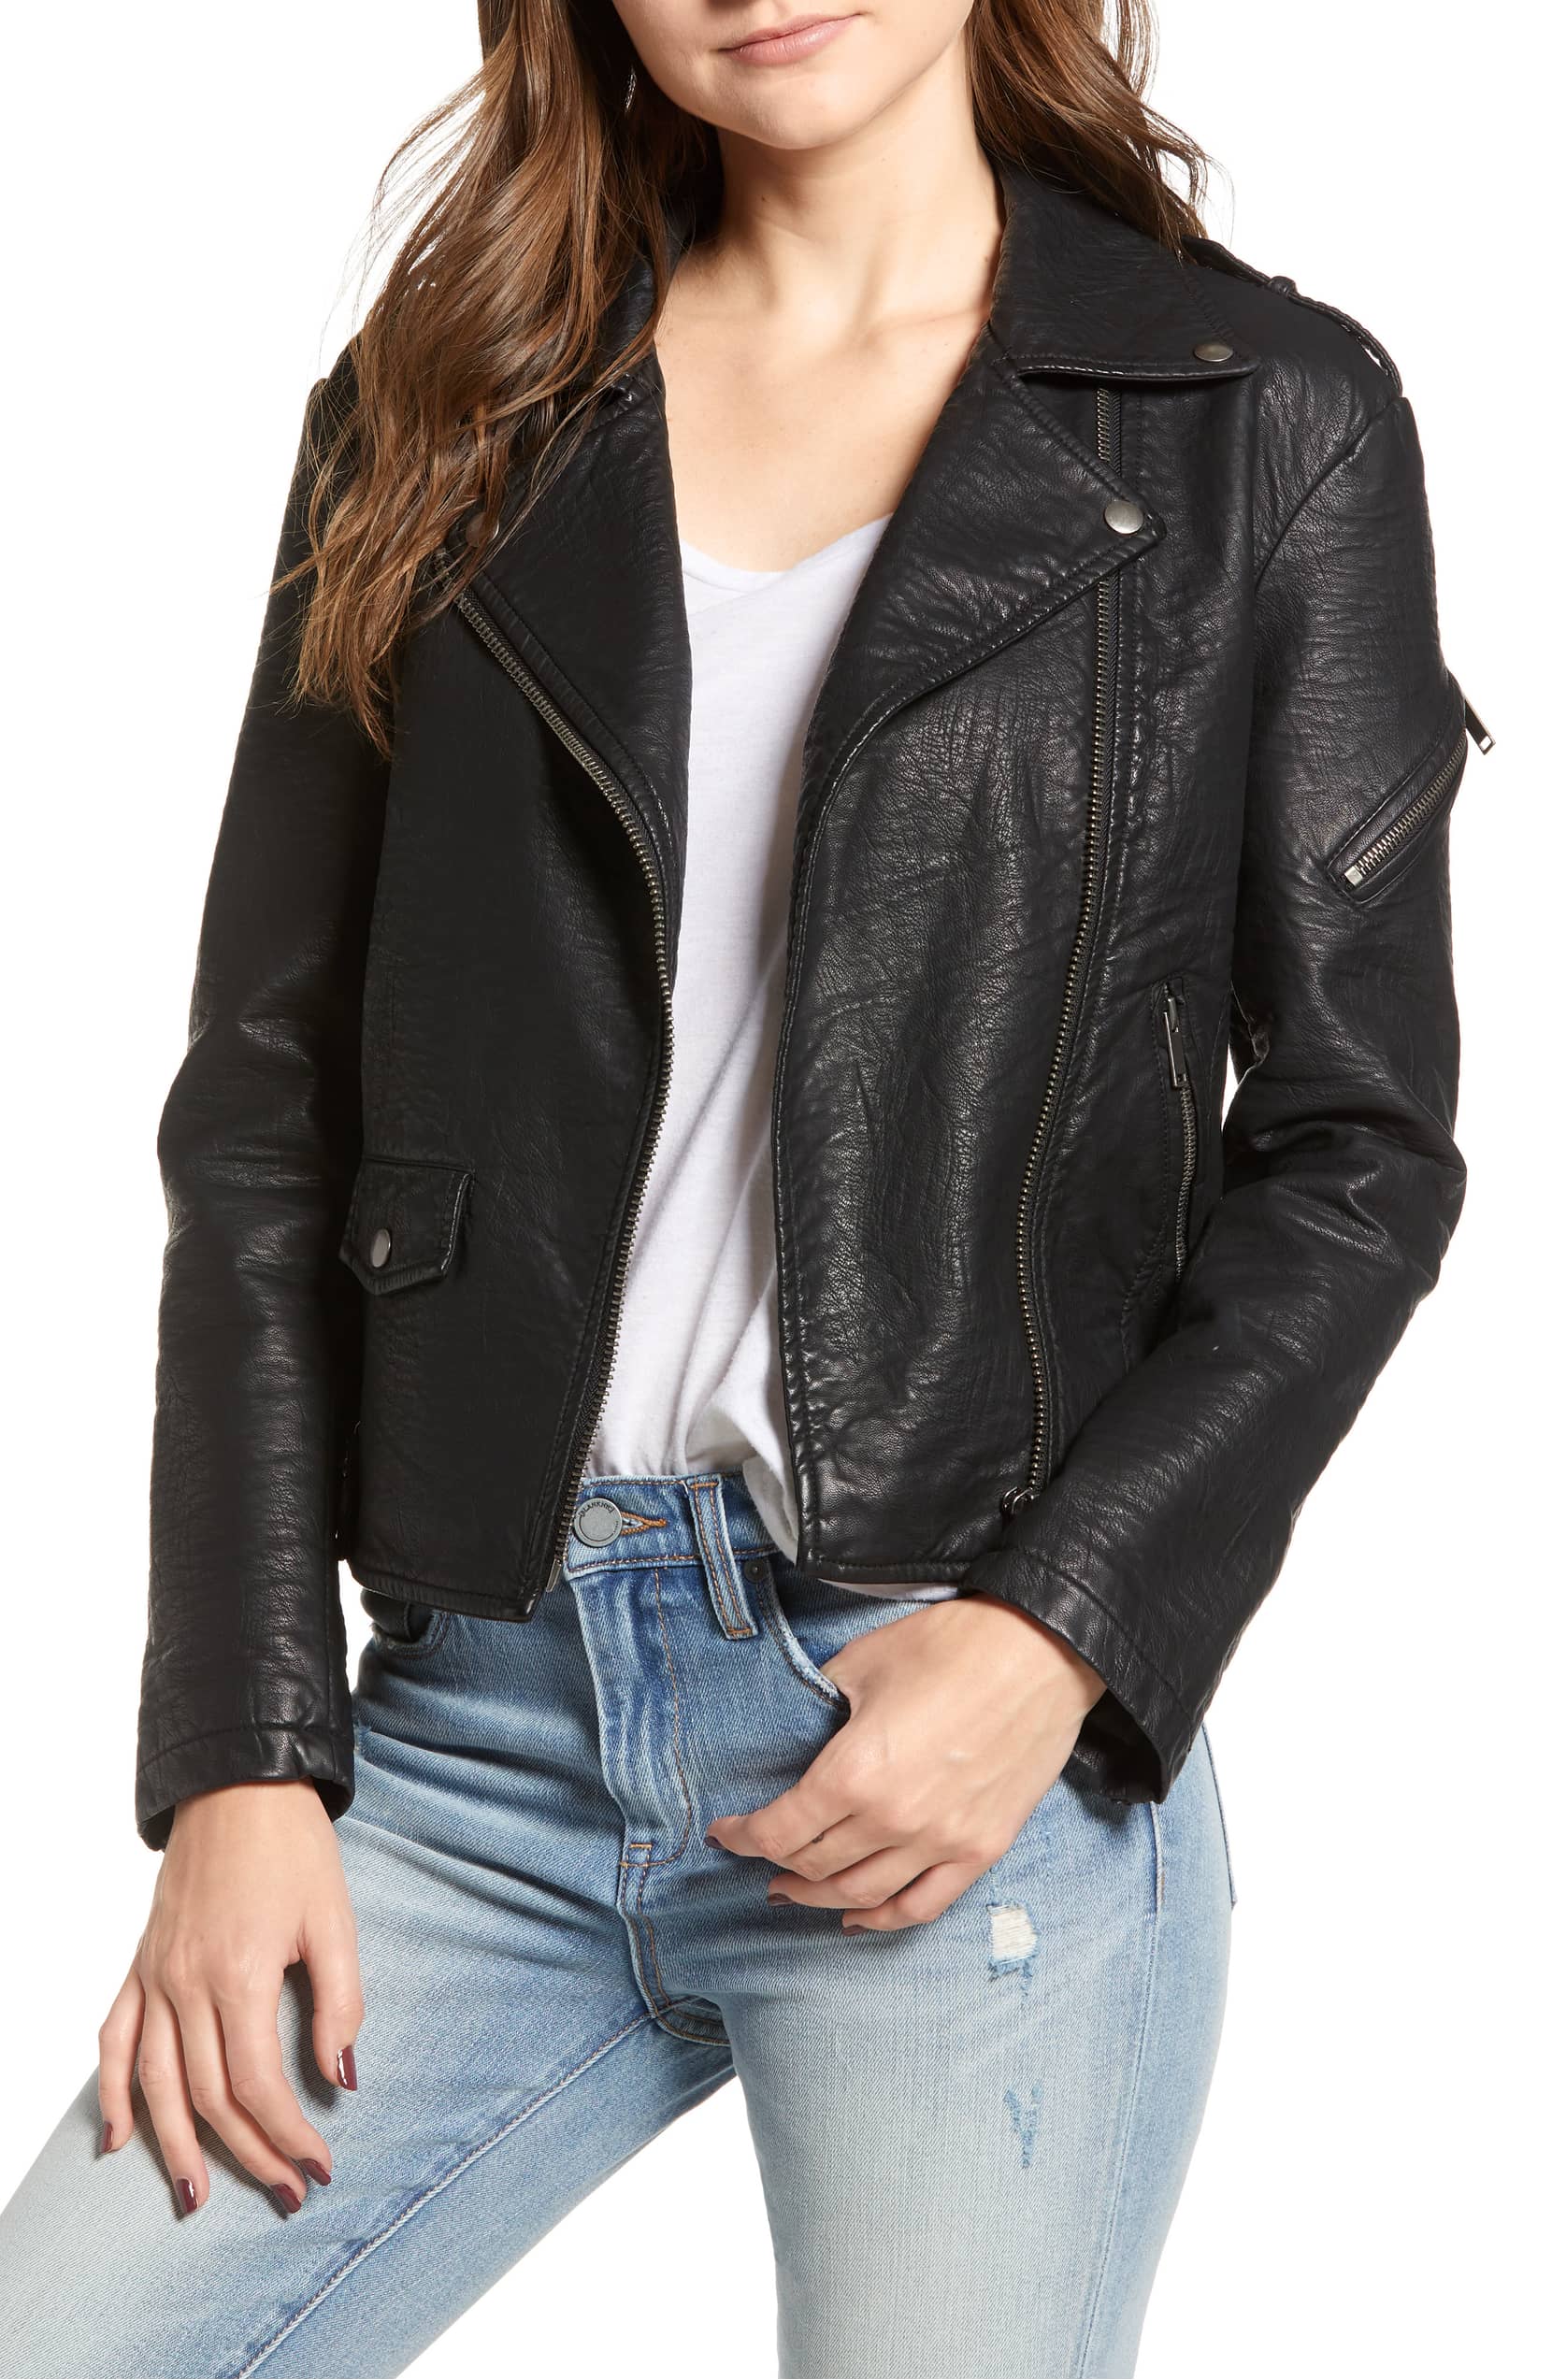 Best Leather Jackets for Fall 2018: Faux, Collarless, Biker